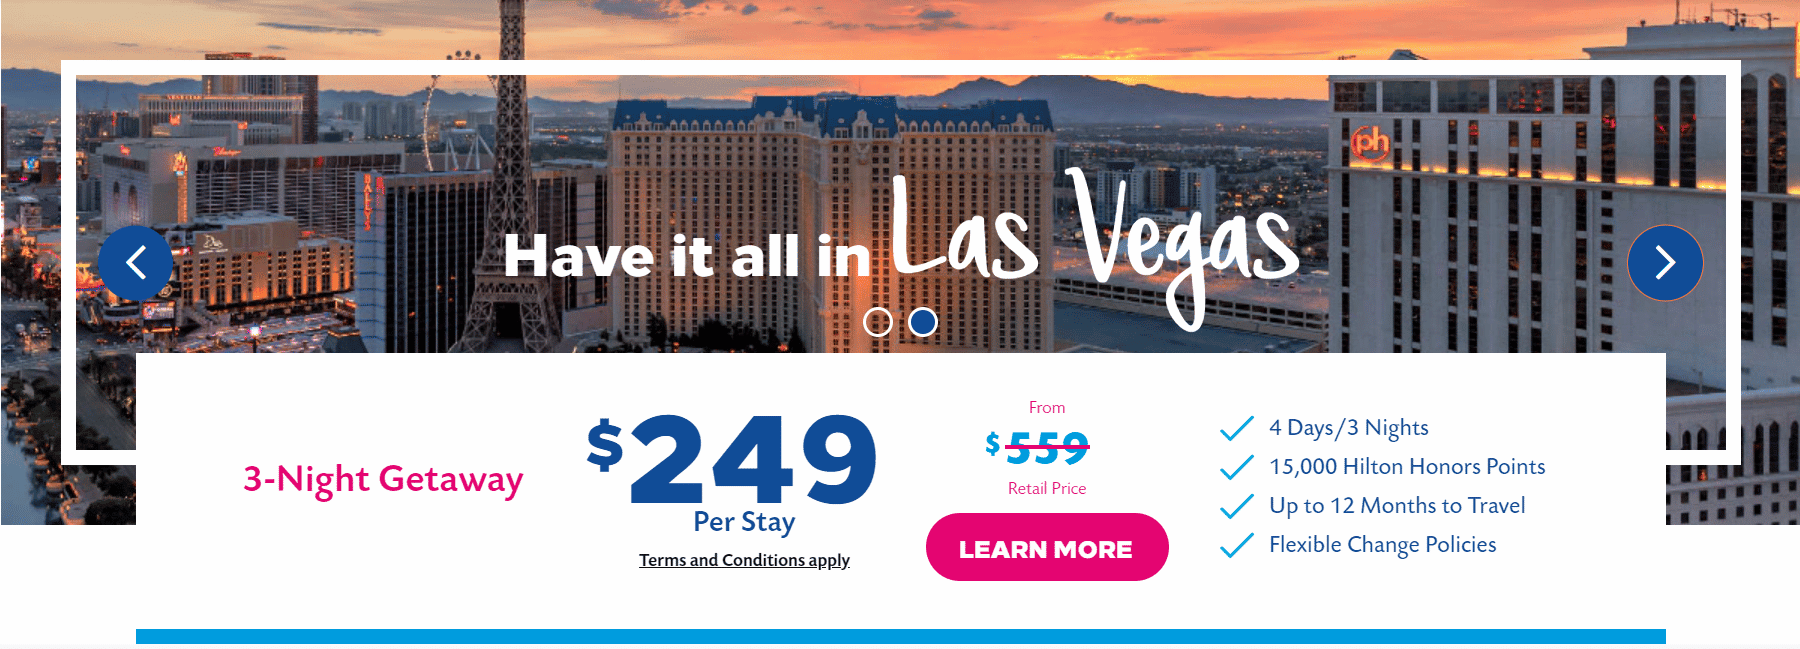 hilton grand vacations timeshare offer for las vegas